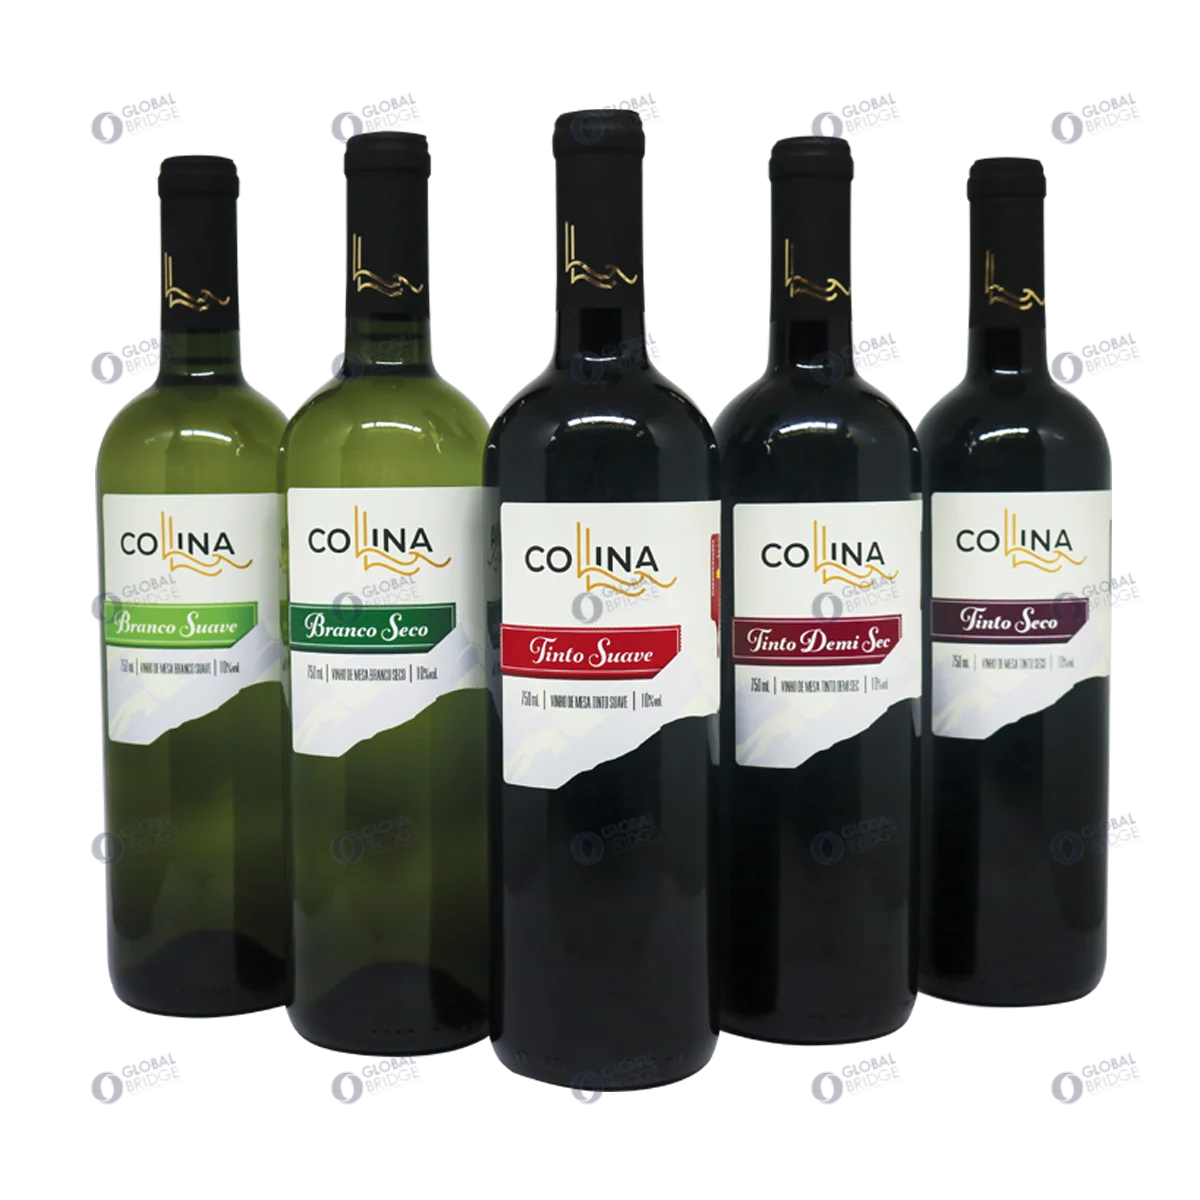 
Red Wine Dry Collina Made in Brazil 750 ml Bottle American Grapes Winemaking Drink Alcoholic Beverage Food Beverage Health Wine 